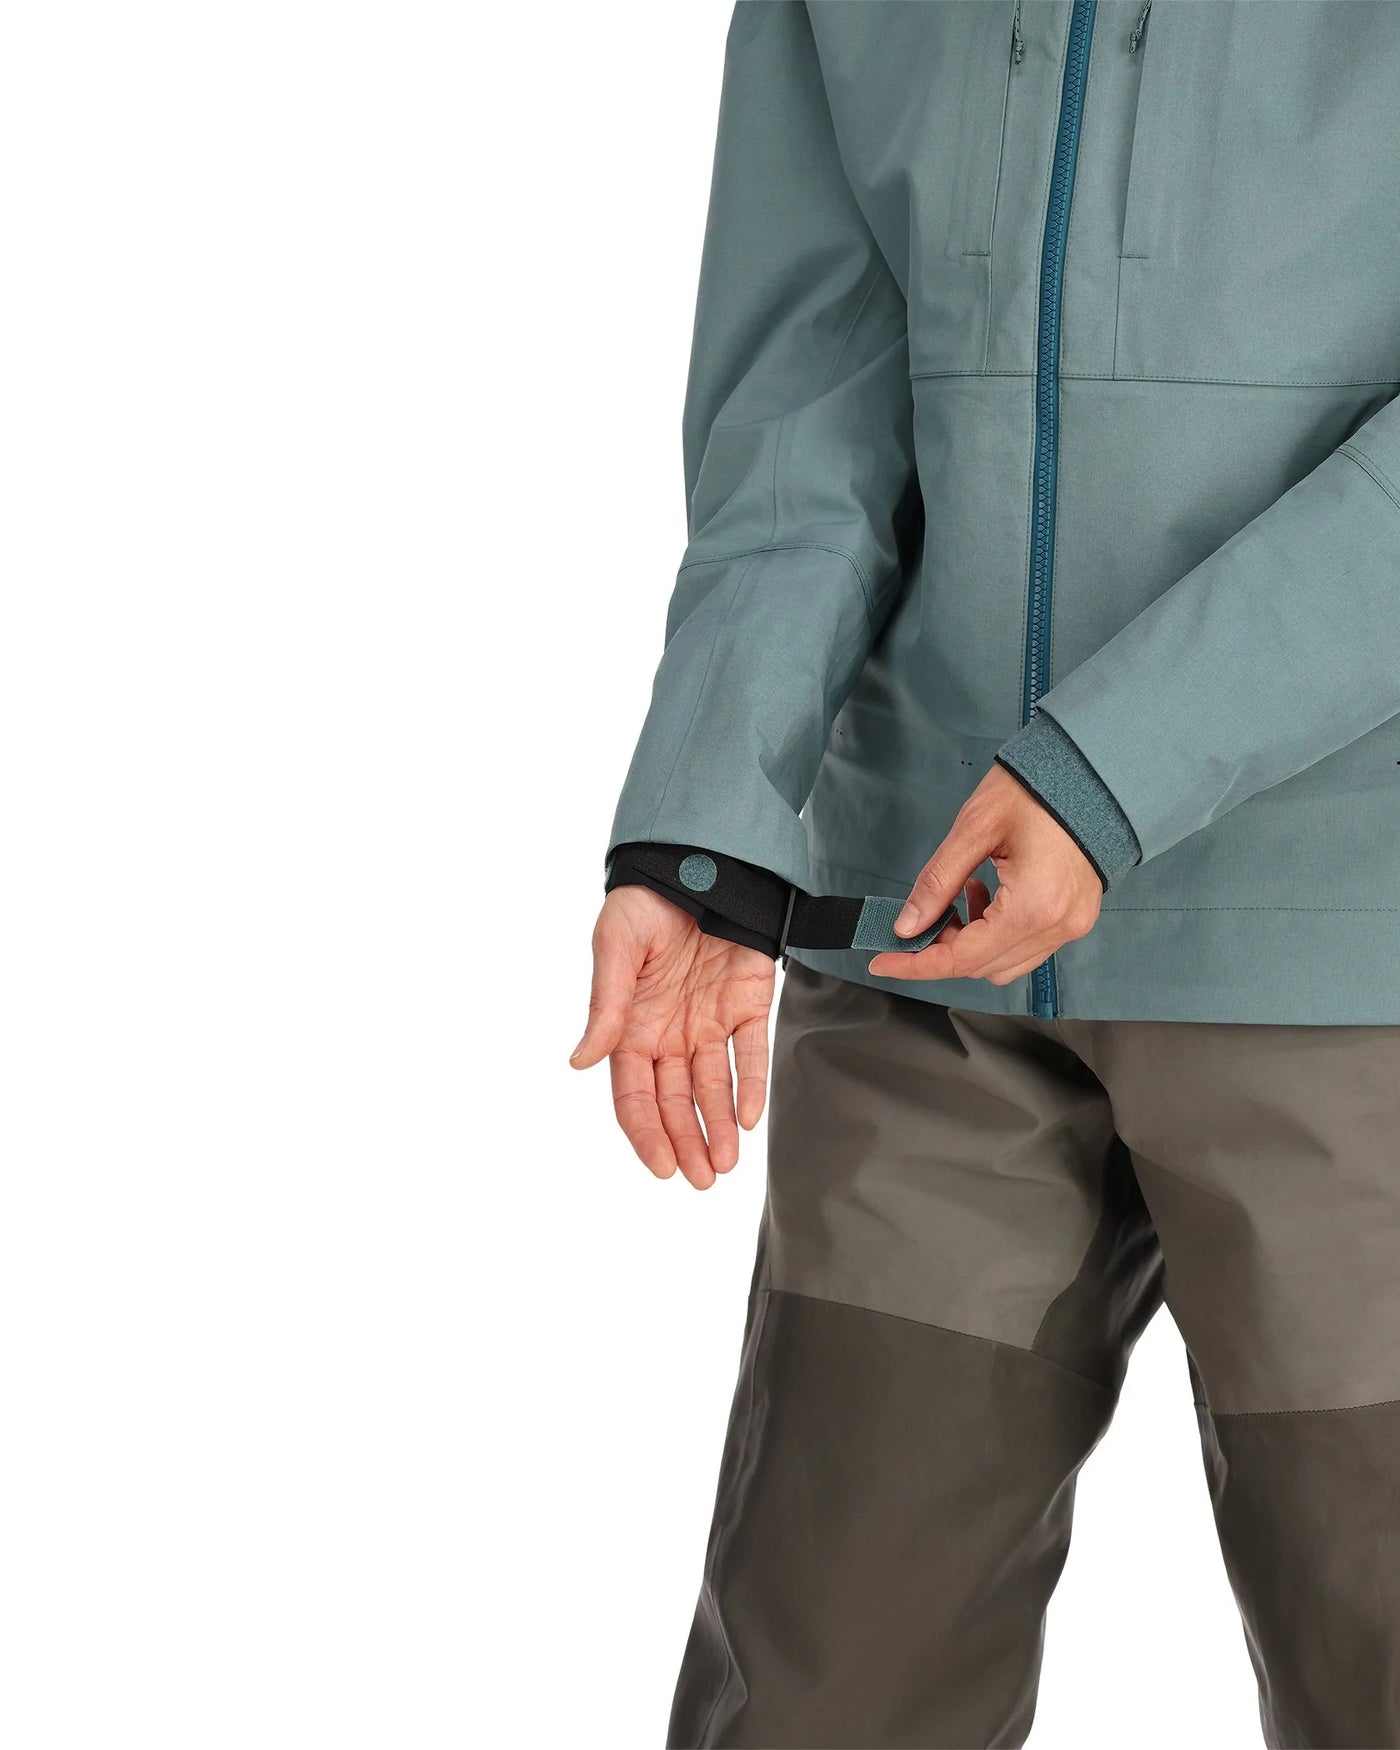 Simms G3 Guide Fly Fishing Jacket